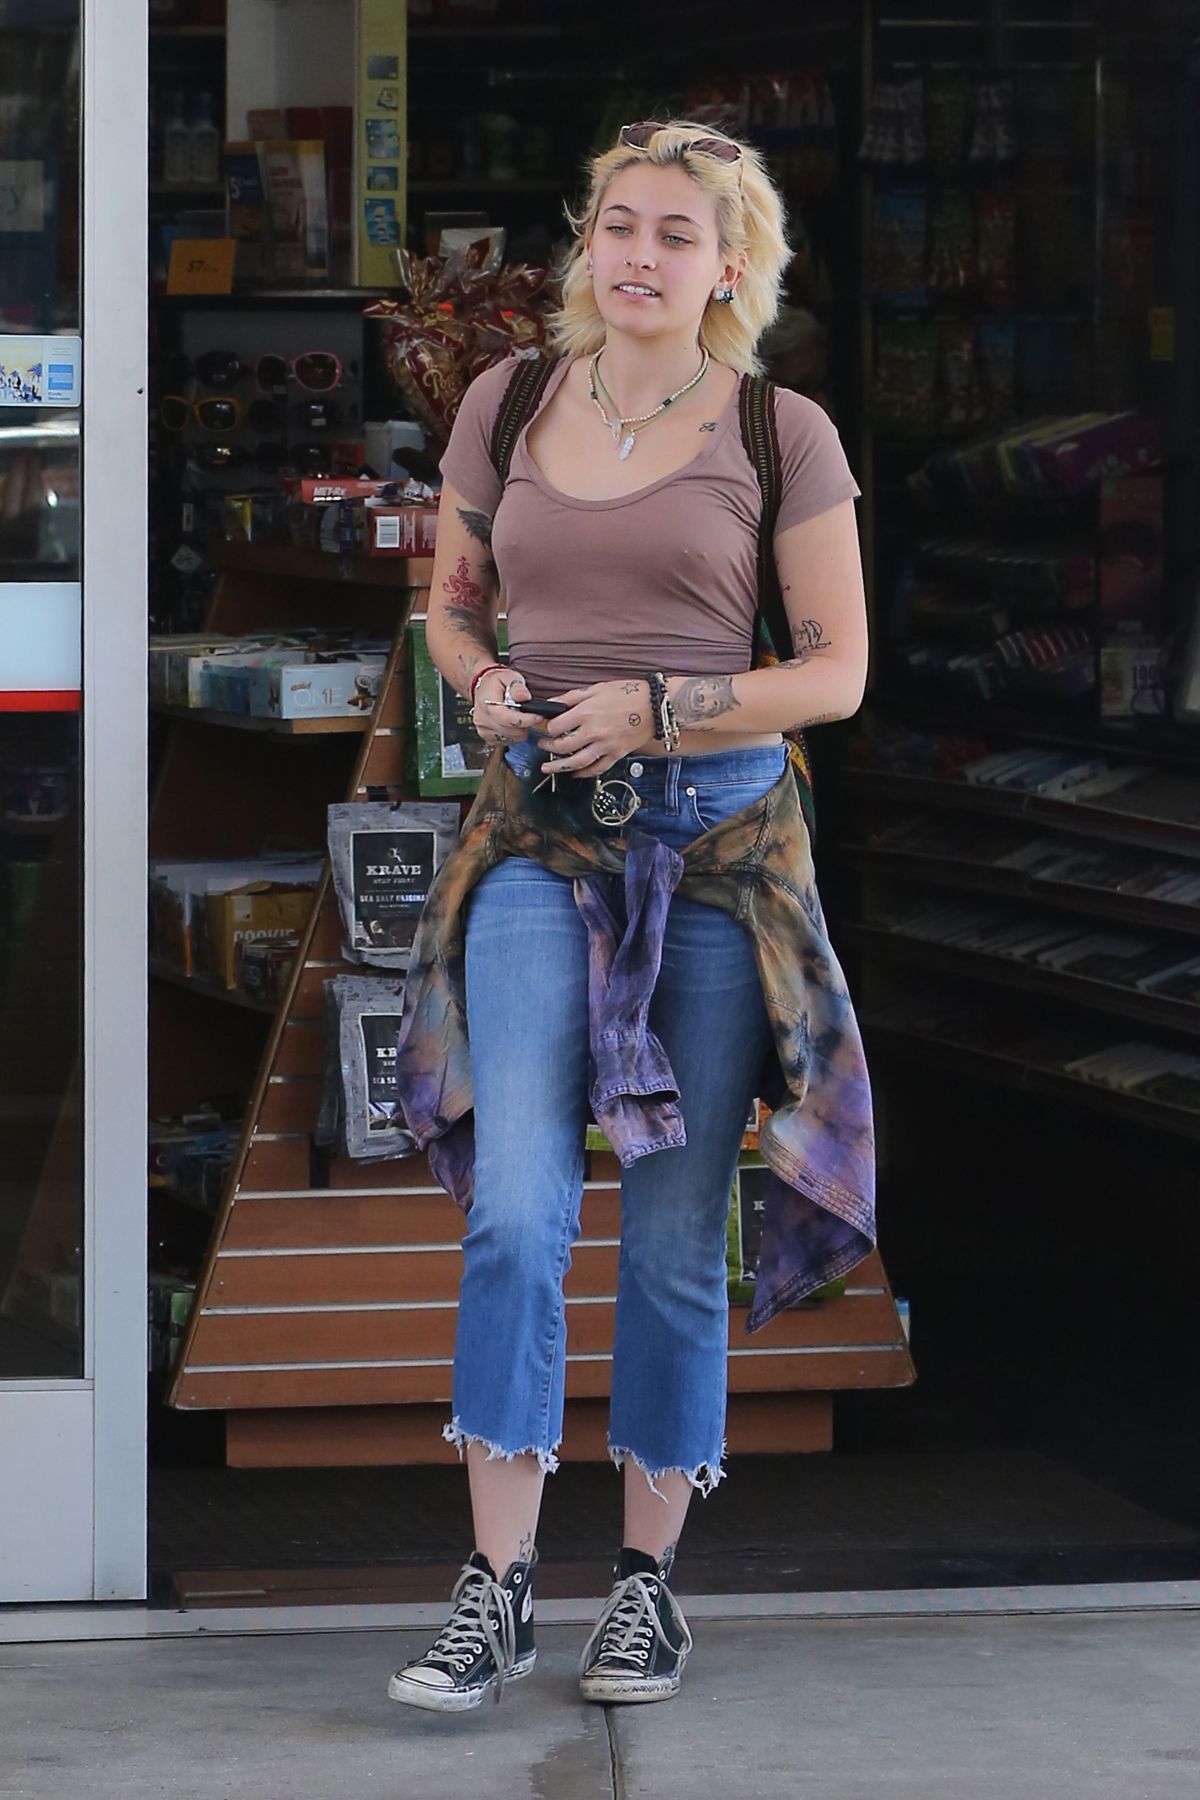 paris-jackson-out-shopping-in-los-angeles-02-15-2017_4.jpg